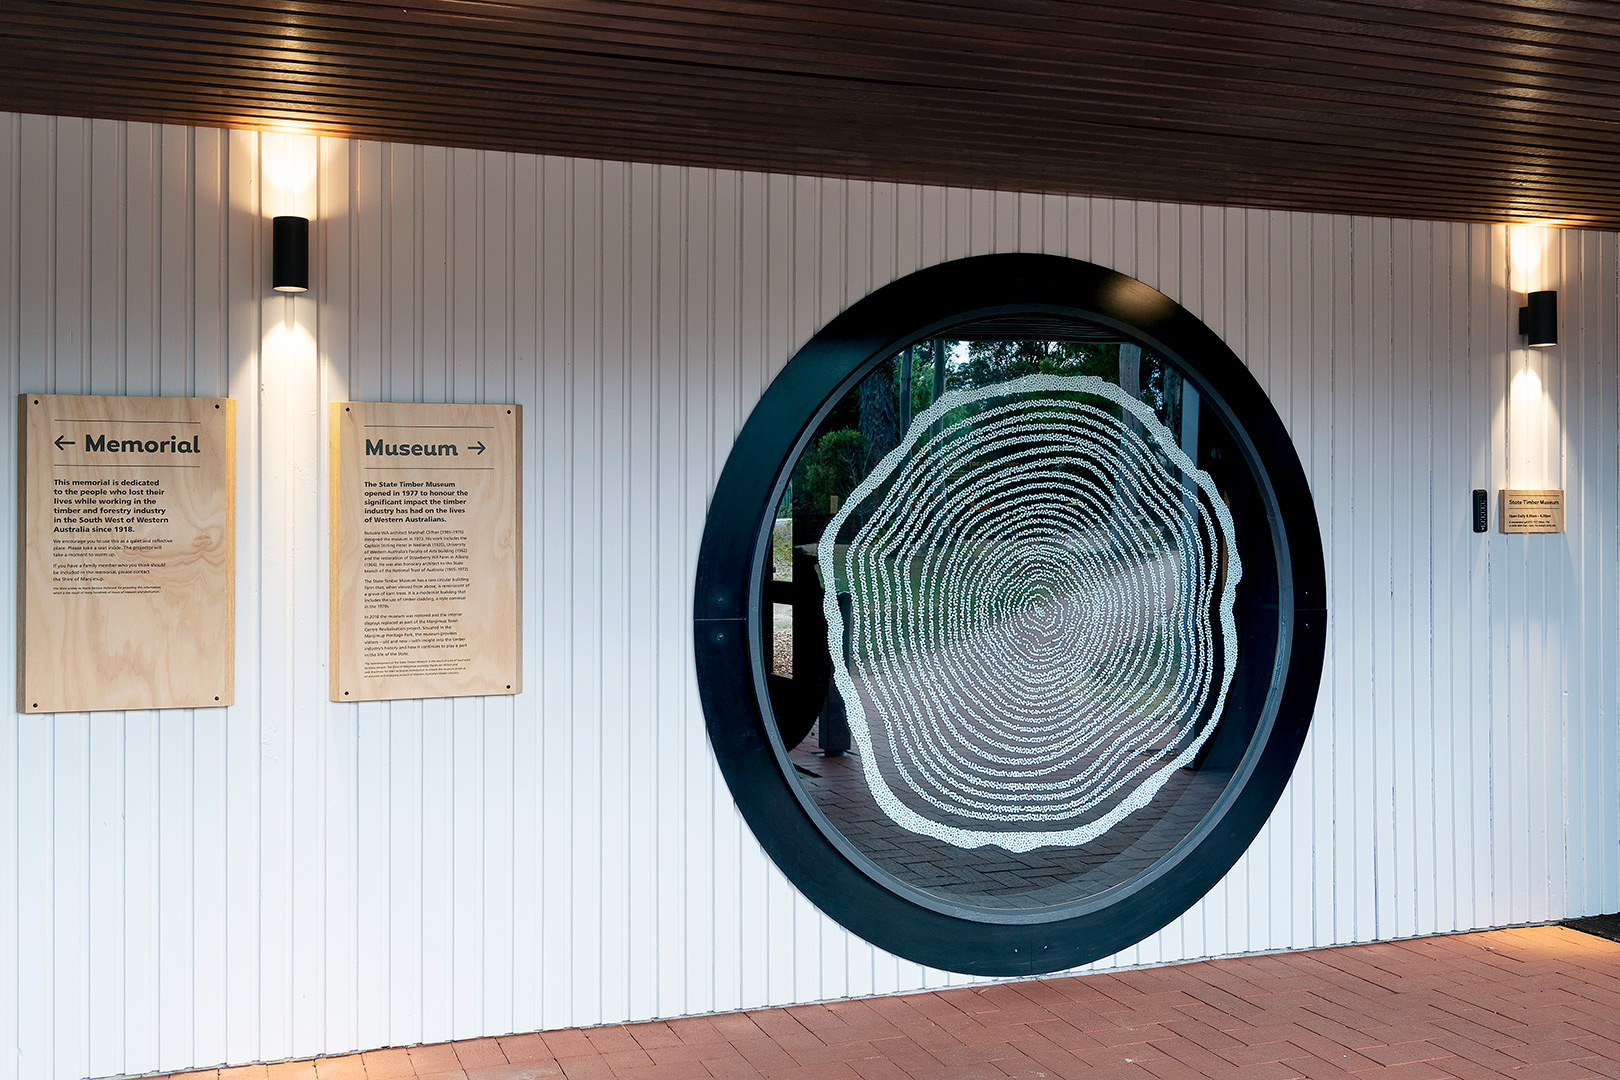 enter of timber museum featuring large circular window with artwork on it